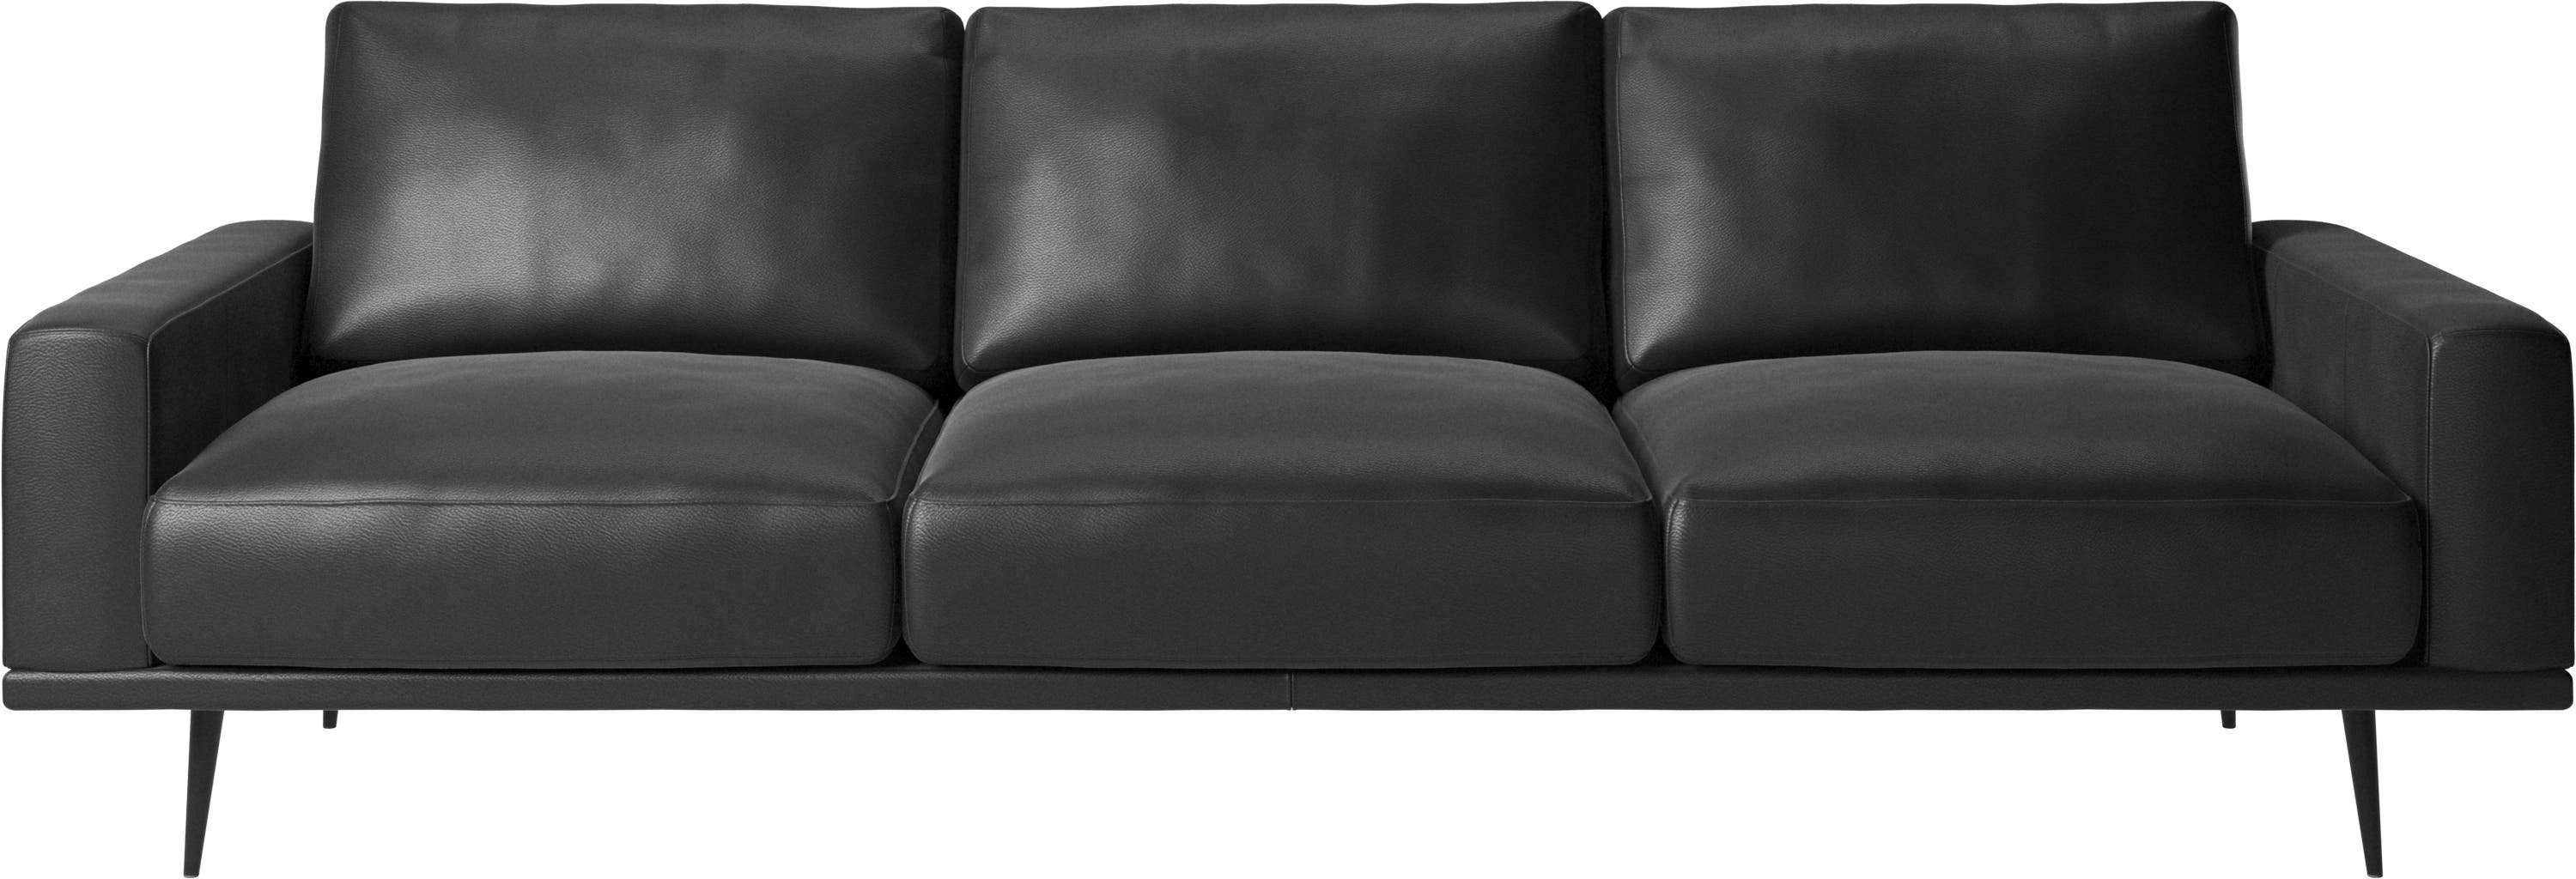 Carlton sofa will give your living room that subtle retro touch that's sure to turn some heads.